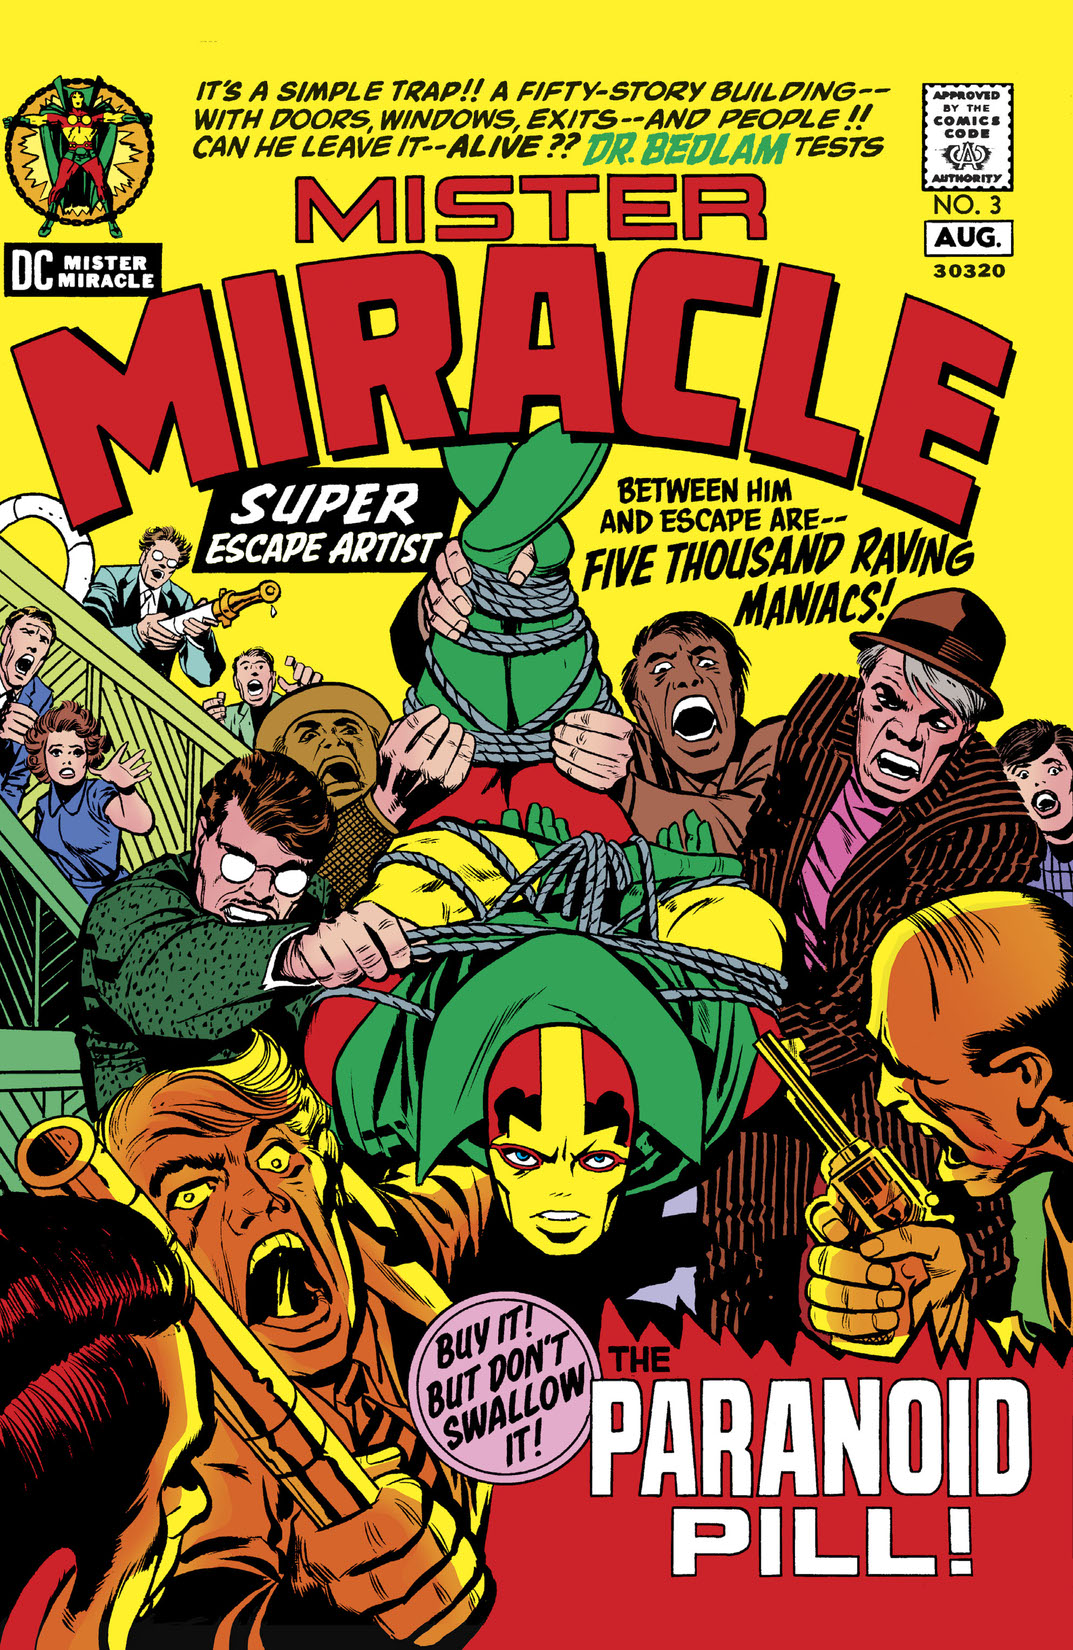 Mister Miracle (1971-) #3 preview images